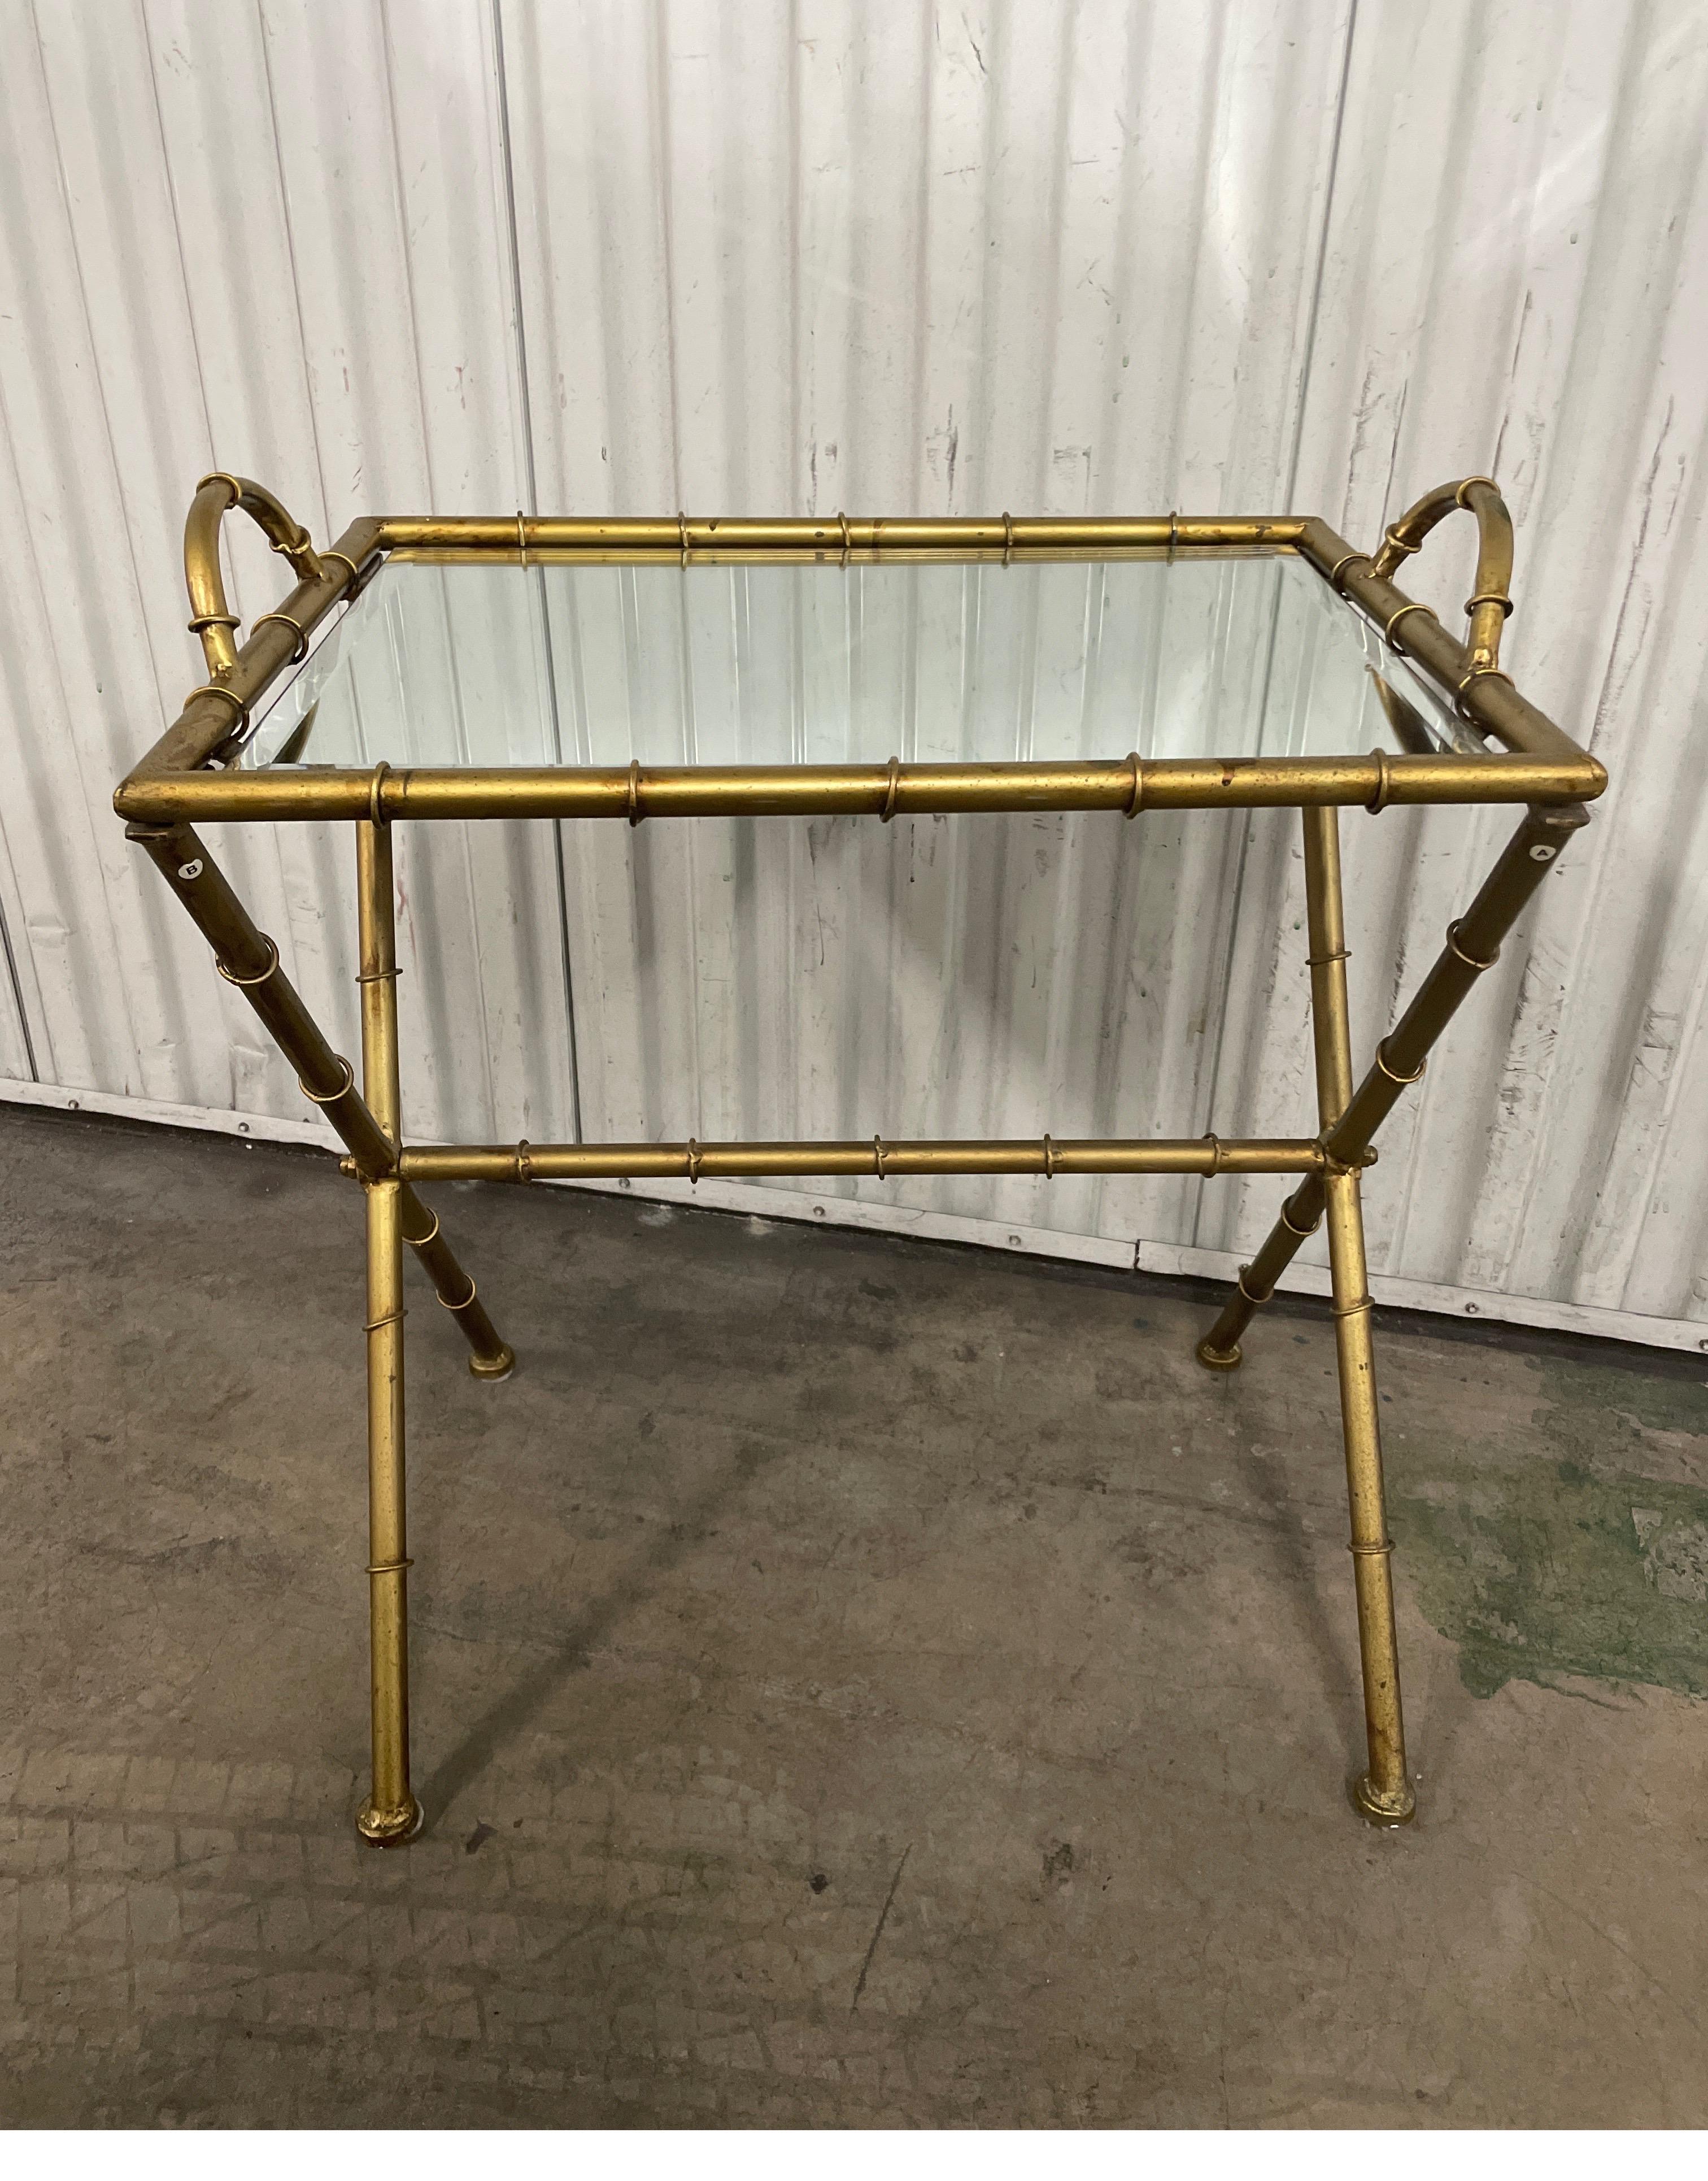 Chic faux bamboo mirrored top tray / snack table with two handles for easy transport.